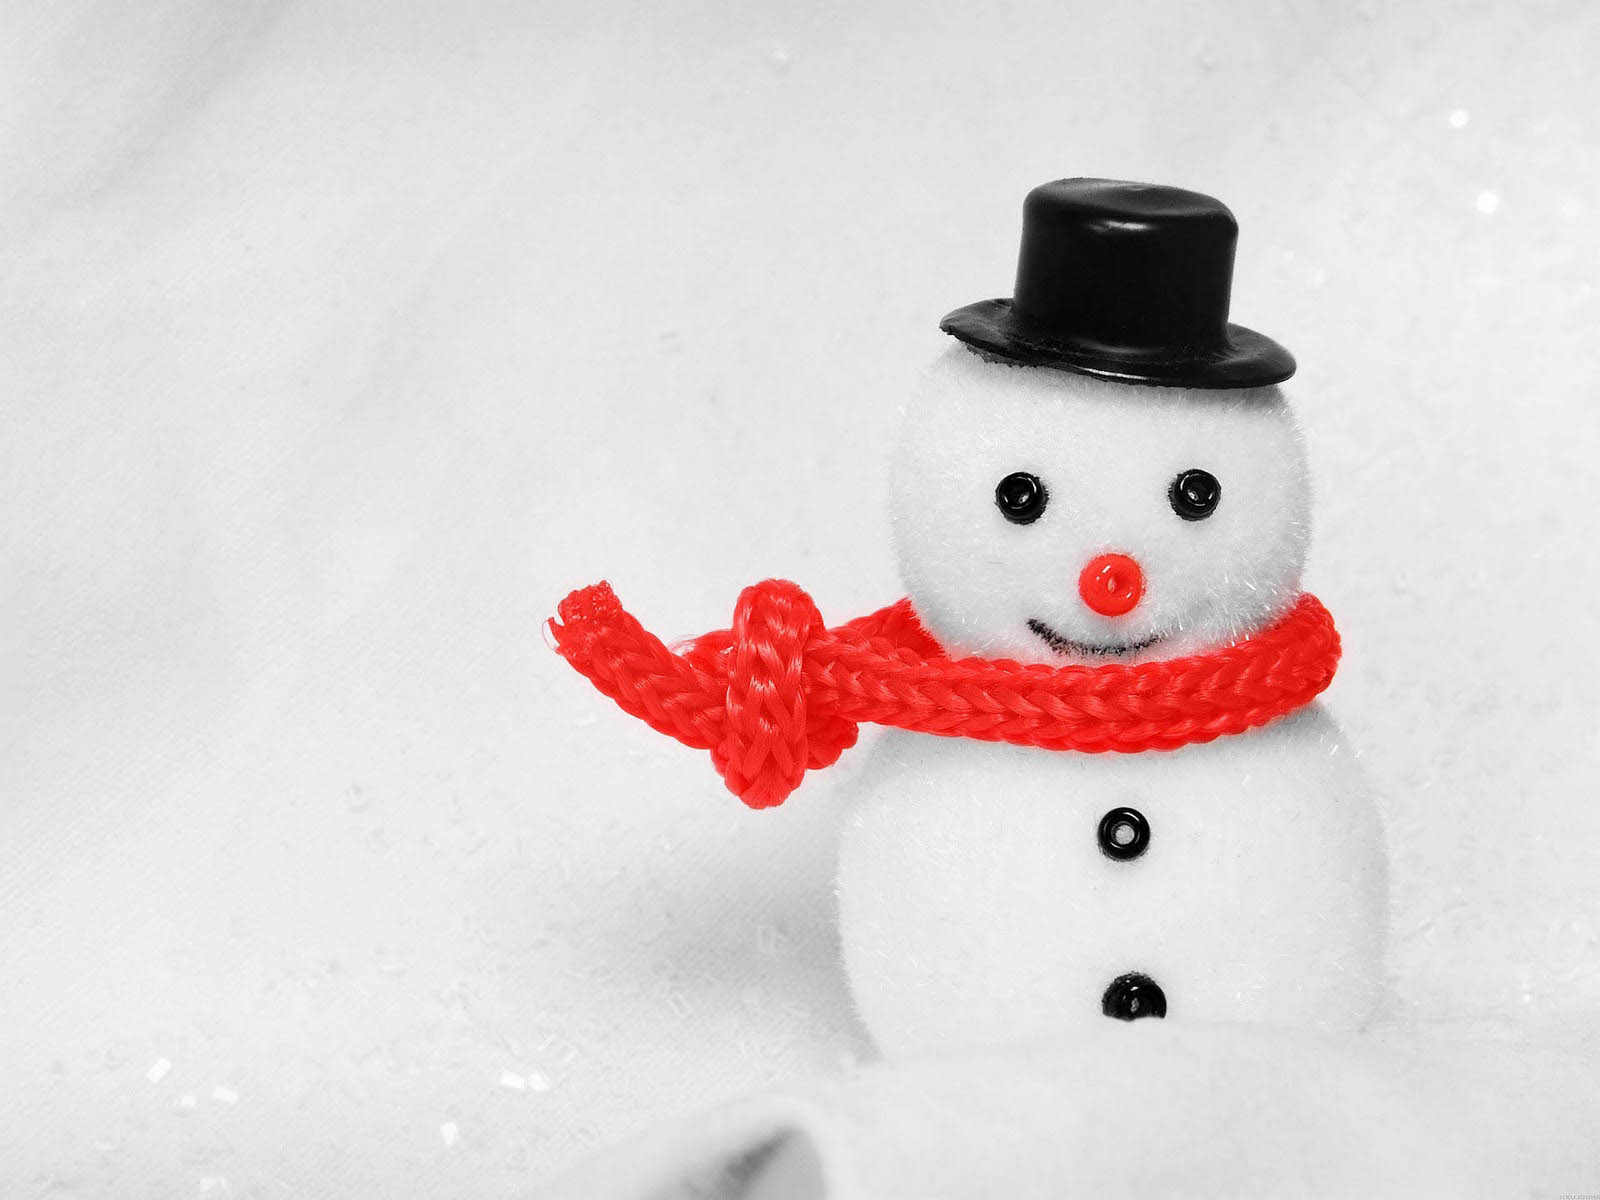 Tag Snowman Wallpaper Background Photos Pictures And Image For